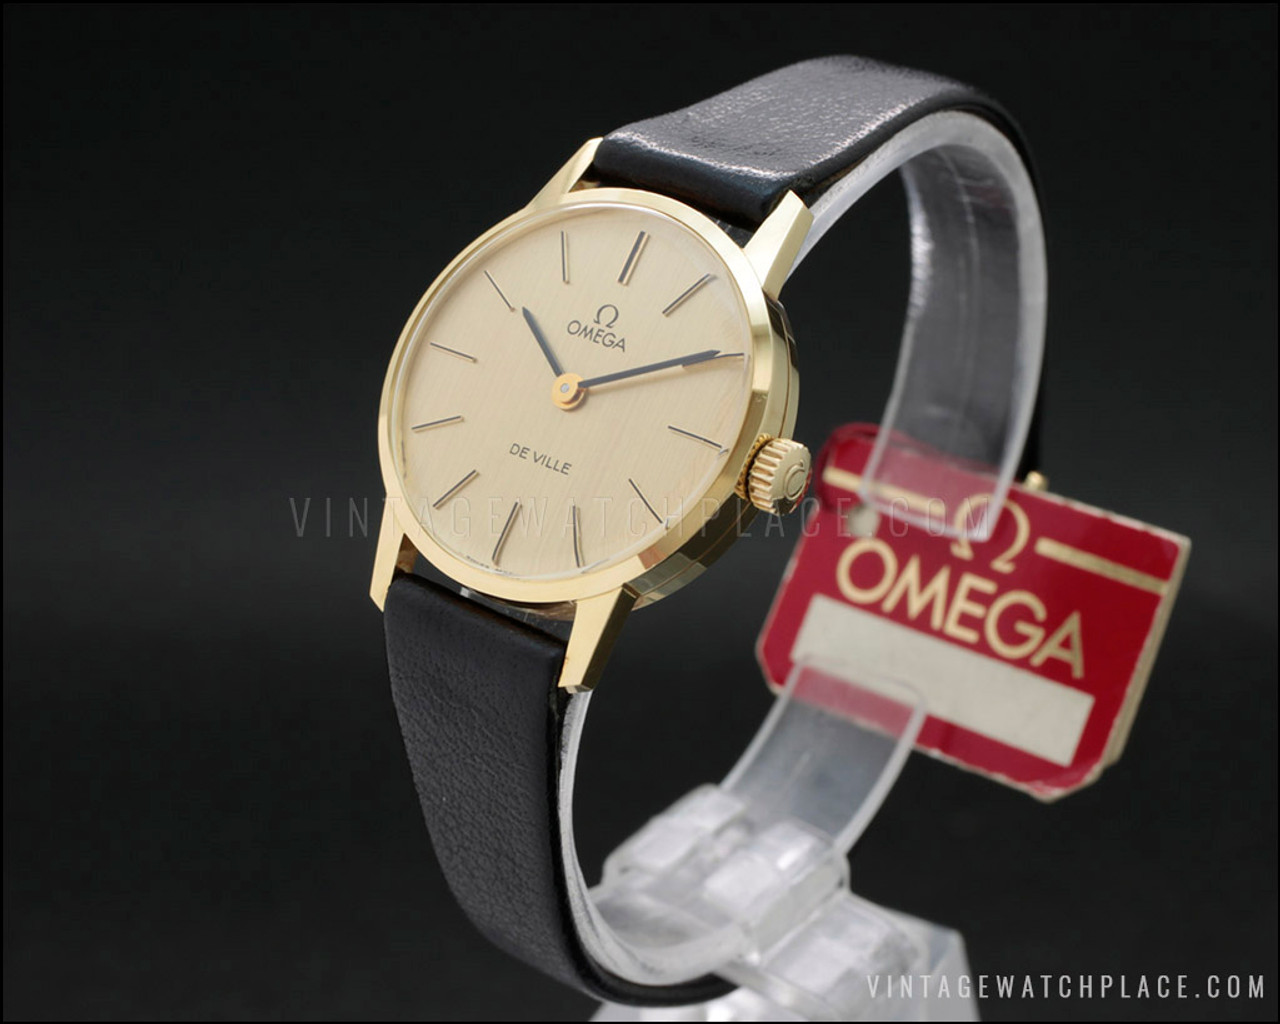 New Old Stock Omega De Ville Ba 511.0544, 18K solid yellow gold